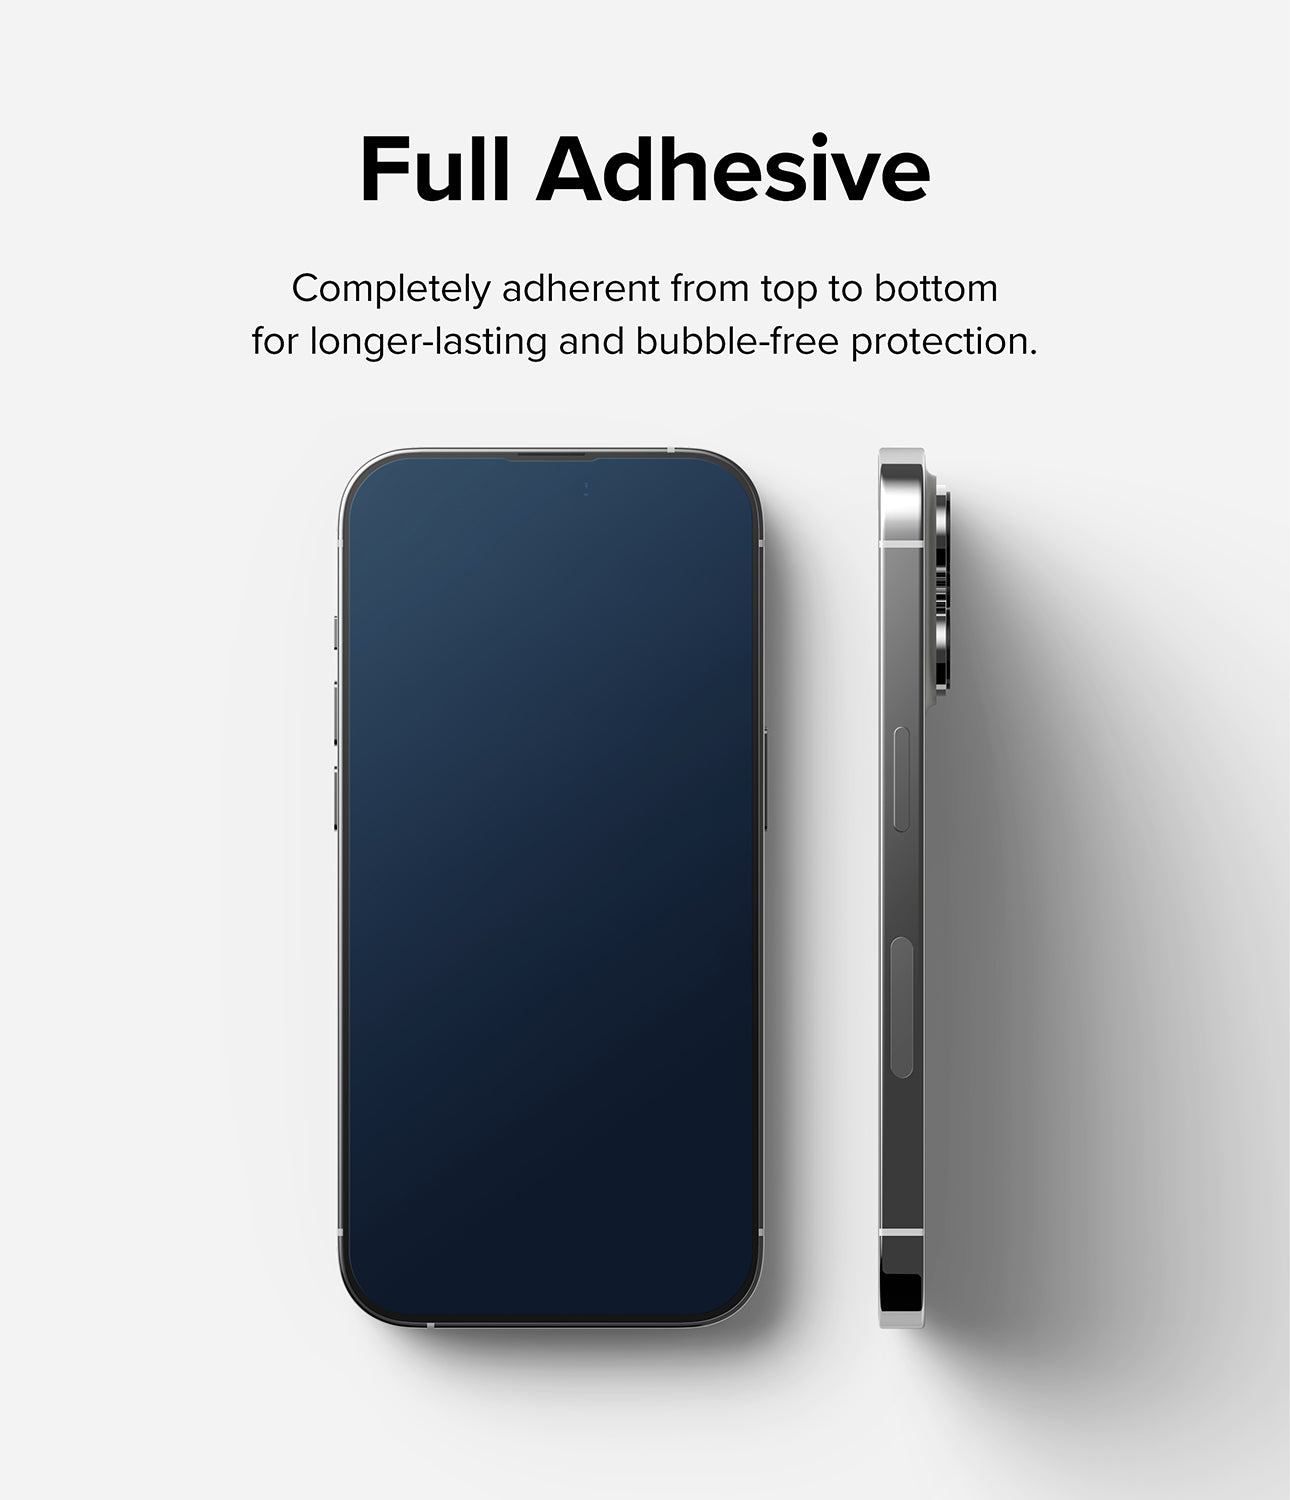 iPhone 14 Pro Max Screen Protector | Full Cover Glass - Full Adhesive. Completely adherent from top to bottom for longer-lasting and bubble-free protection.